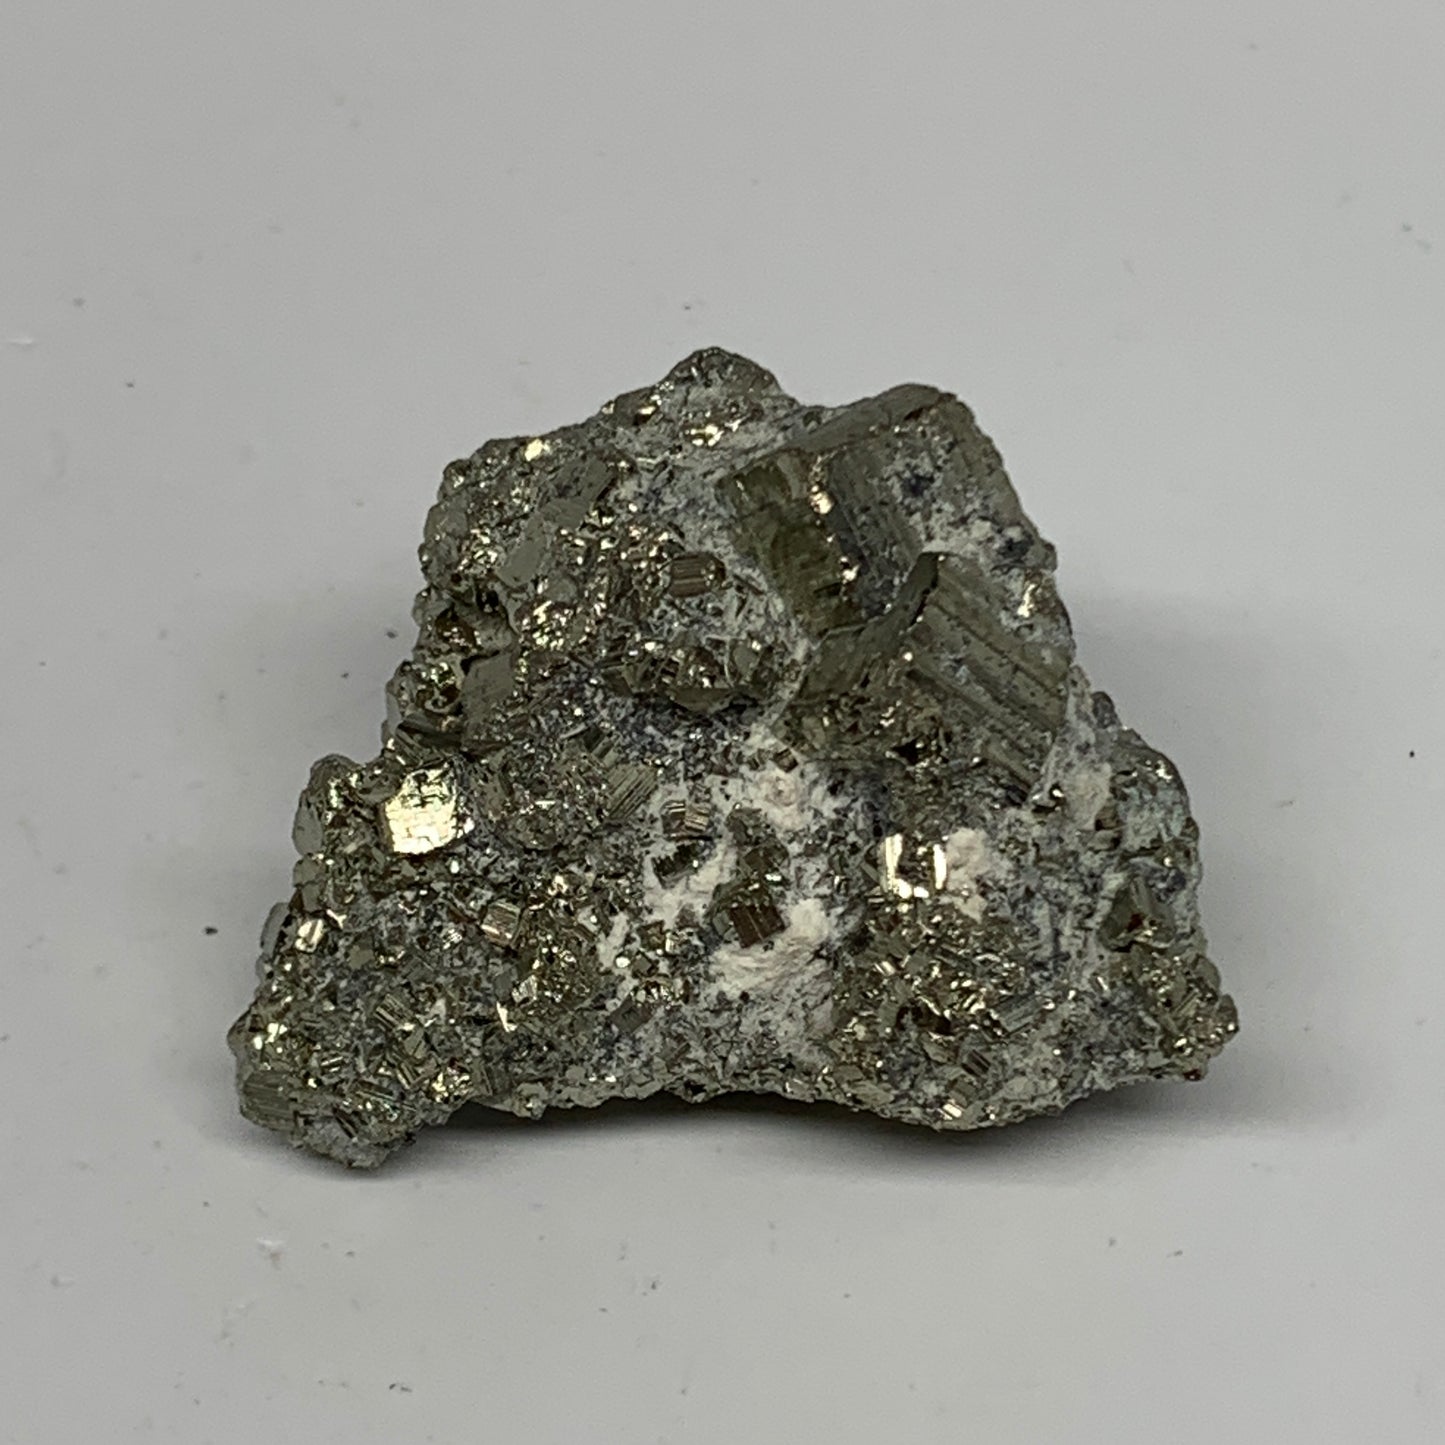 44.5g, 1.5"x1.3"x1", Natural Untreated Pyrite Cluster Mineral Specimens,B19399